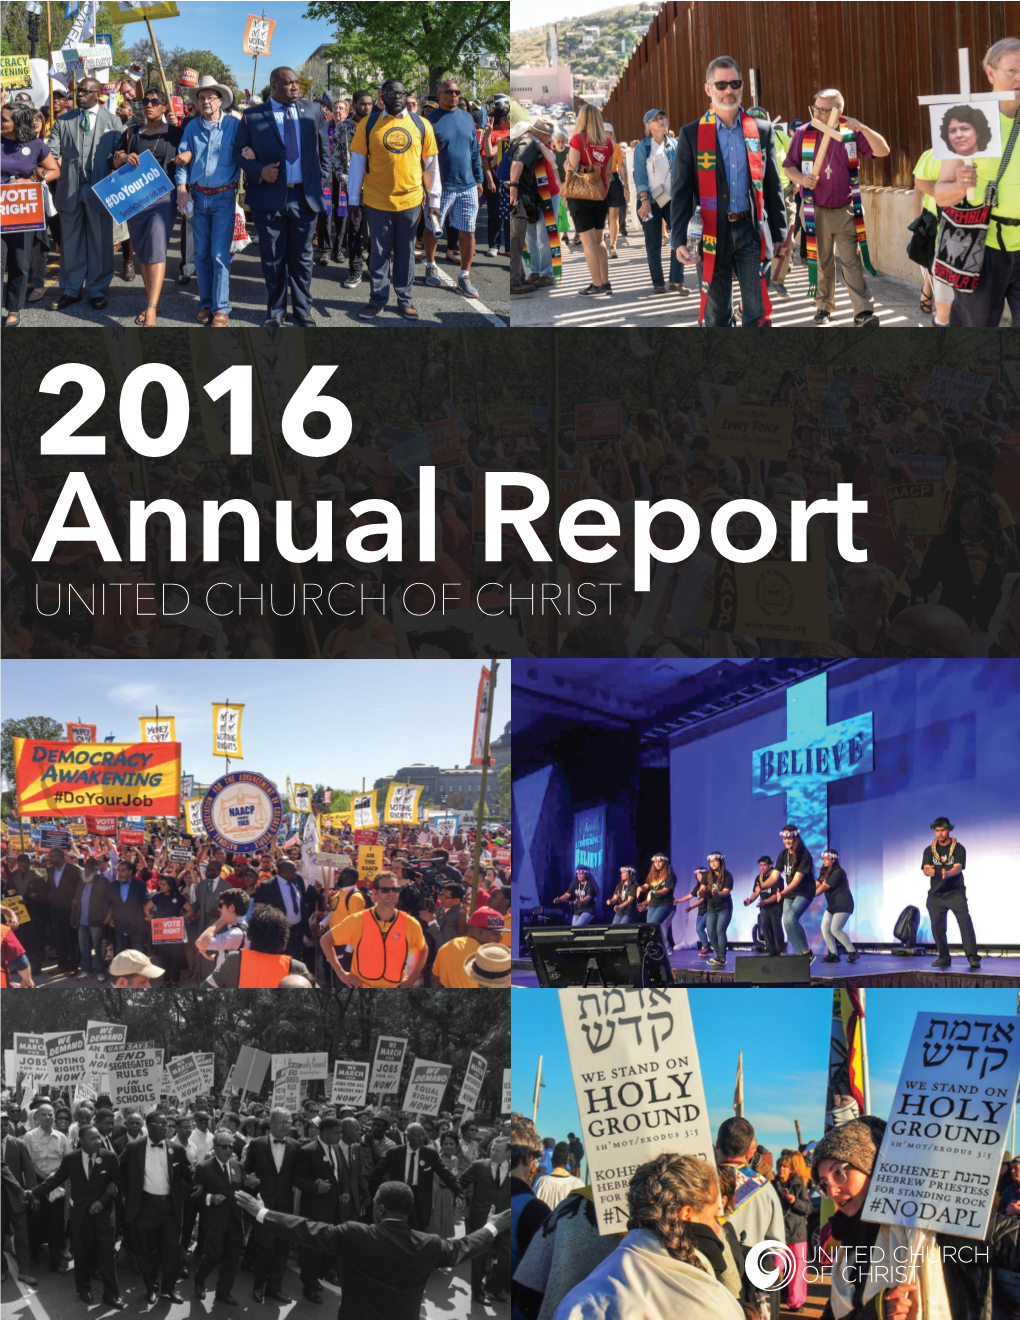 2016 Annual Report UNITED CHURCH of CHRIST the UNITED CHURCH of CHRIST BOARD SOURCES and USES of FUNDS UNAUDITED for the YEAR ENDING DECEMBER 31, 2016